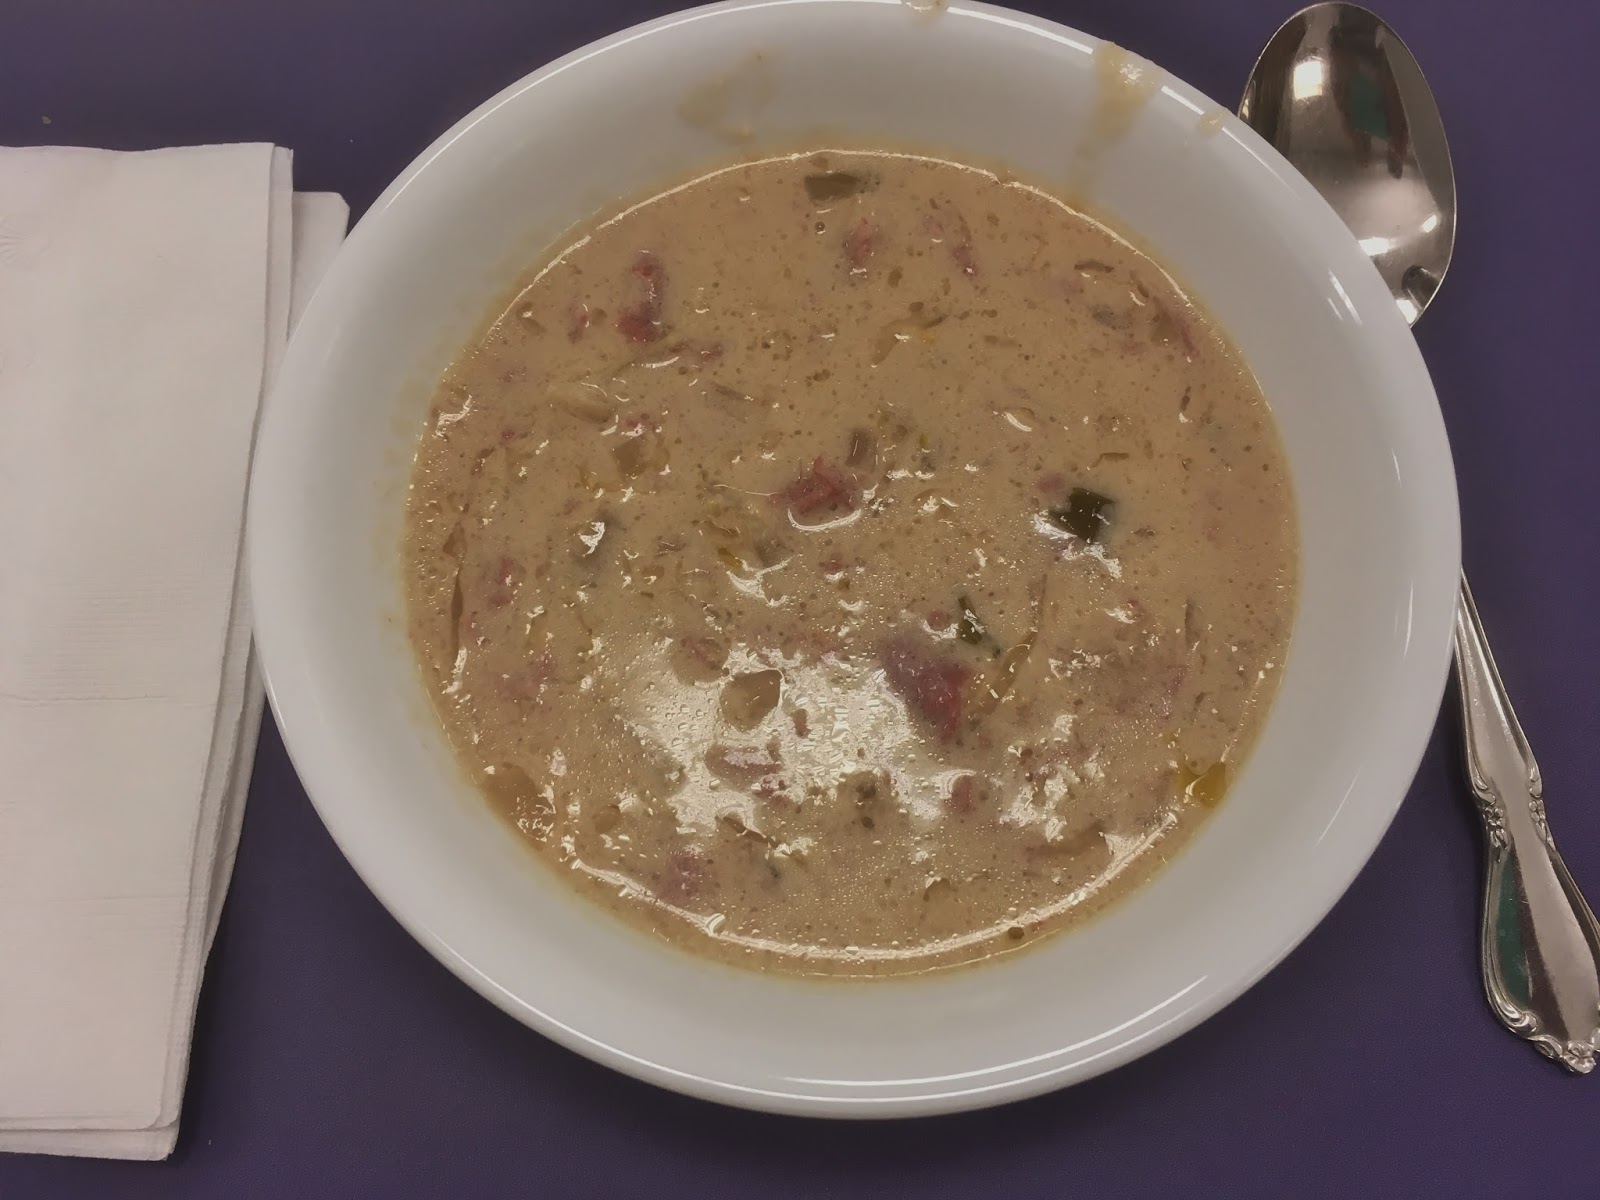 Best of Long Island and Central Florida: Reuben Soup